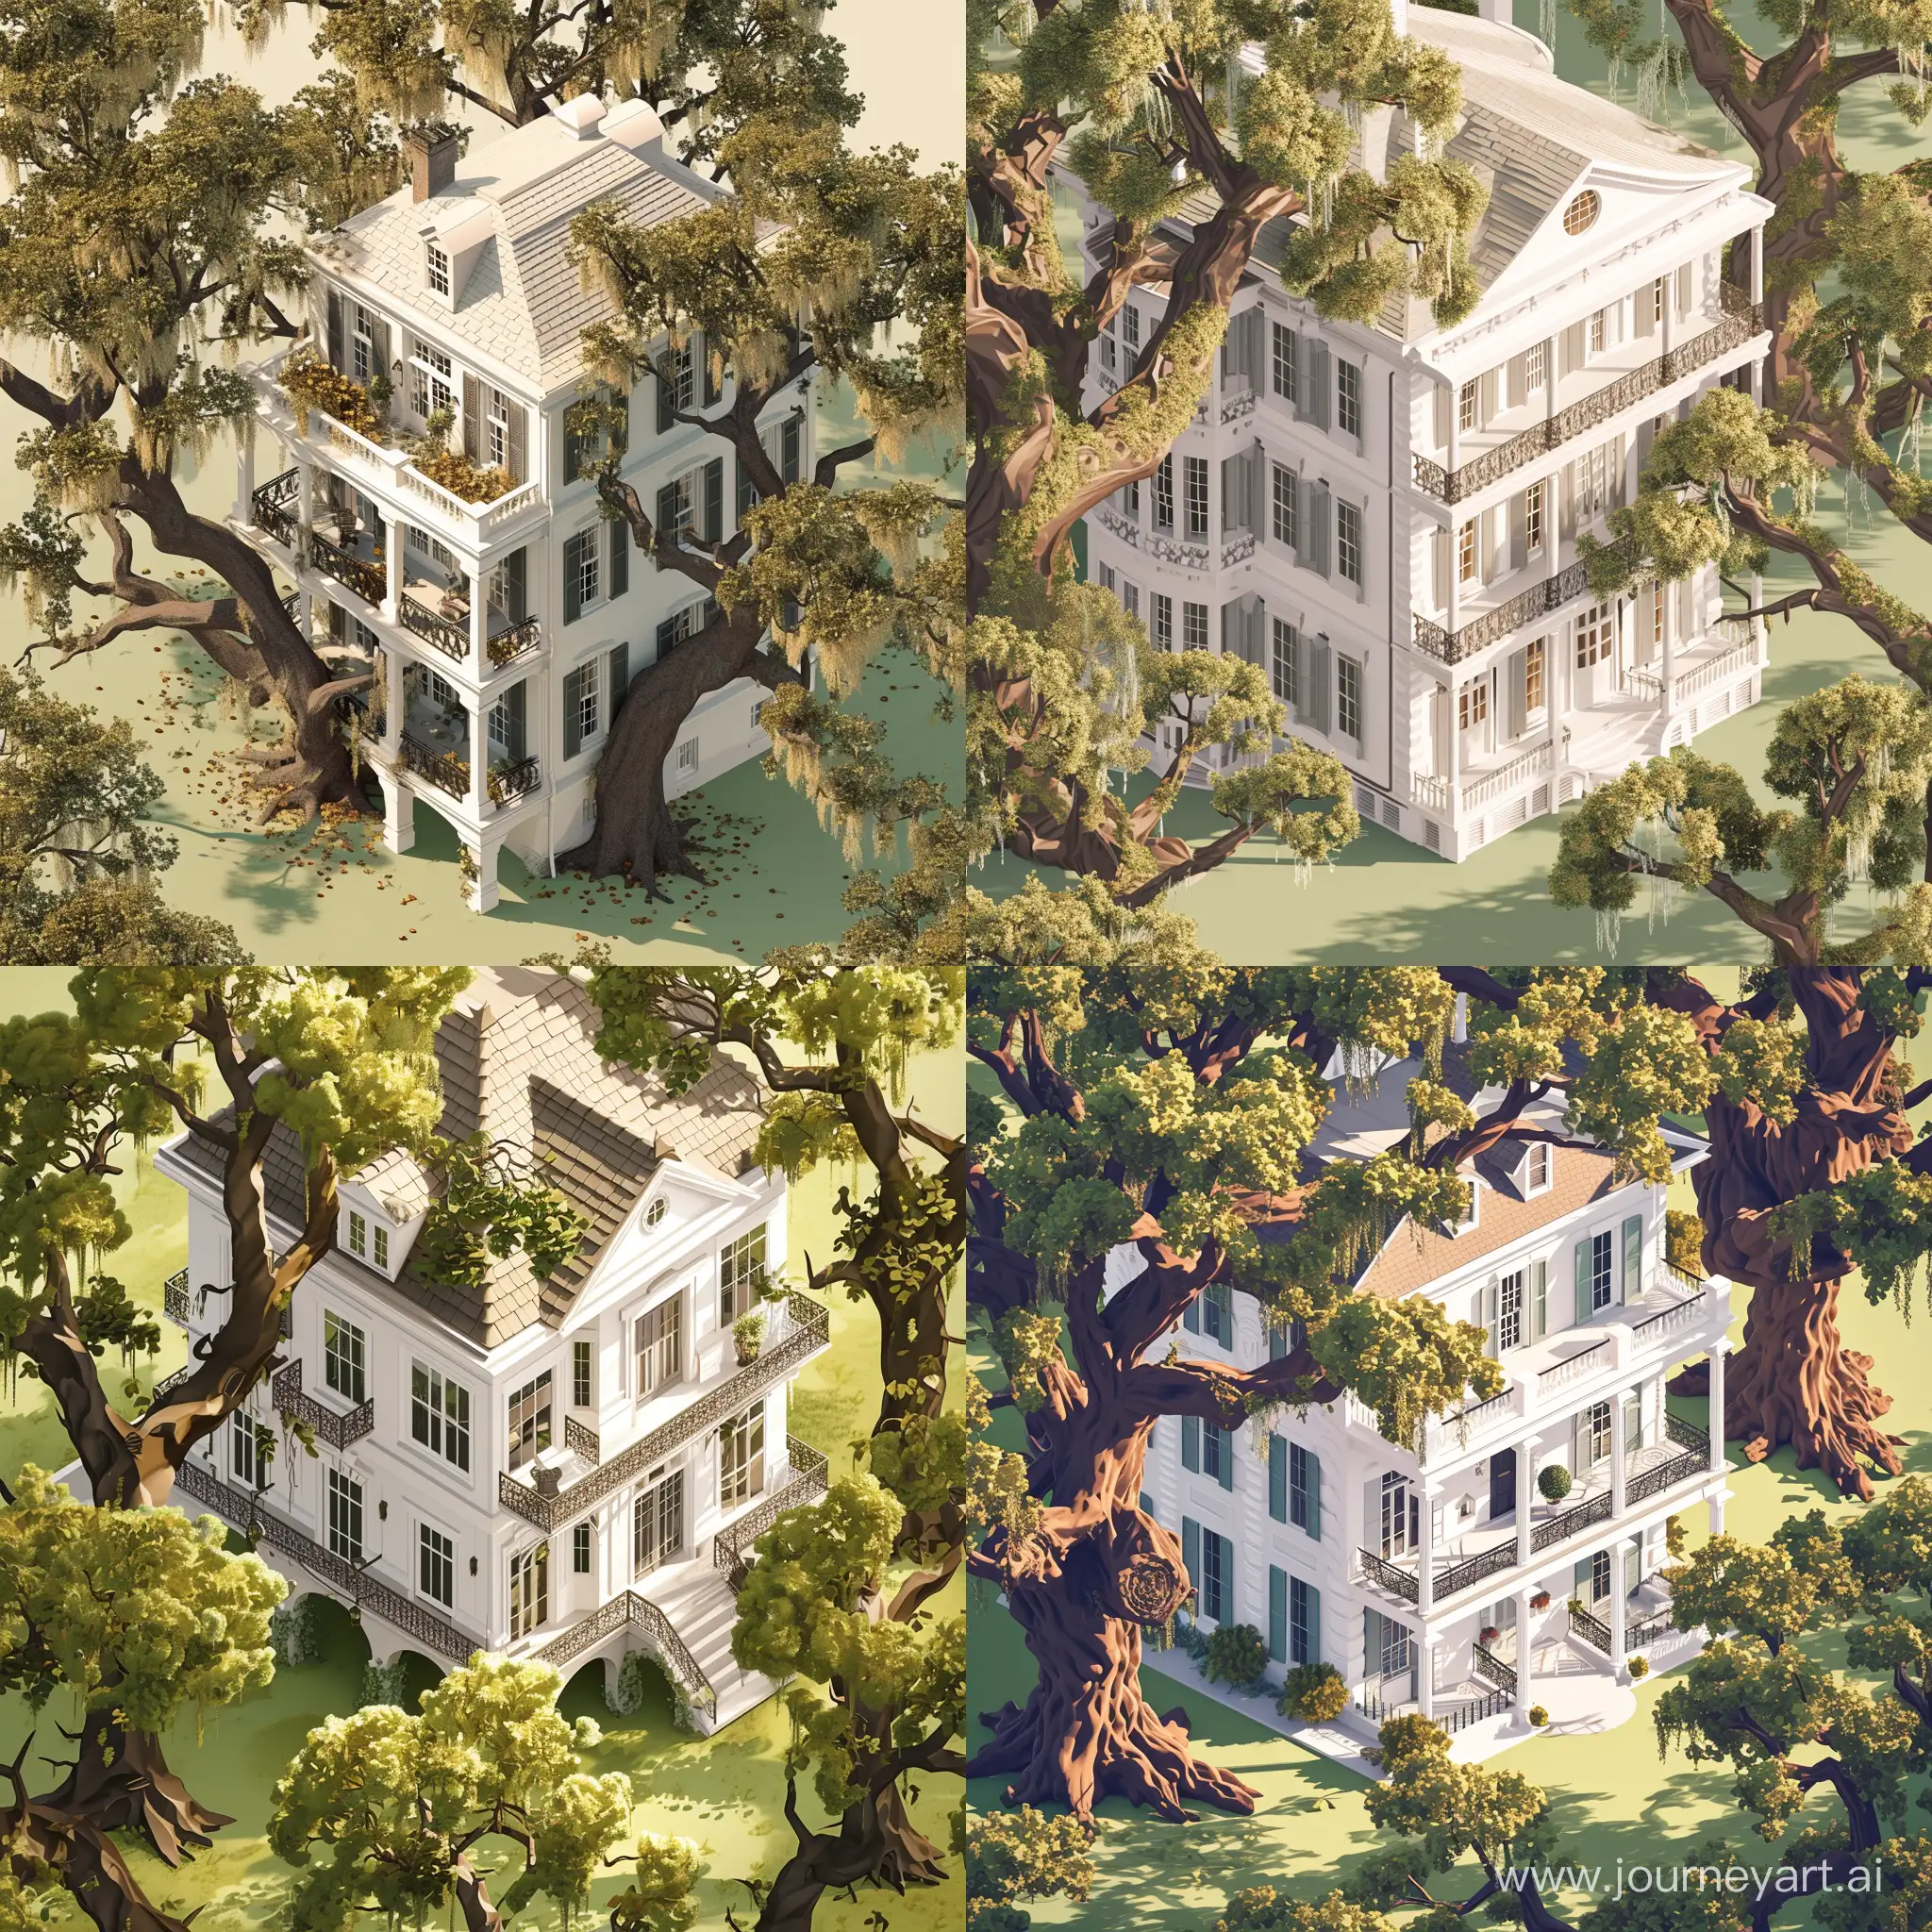 Historic-Savannah-TwoStory-House-Surrounded-by-Live-Oaks